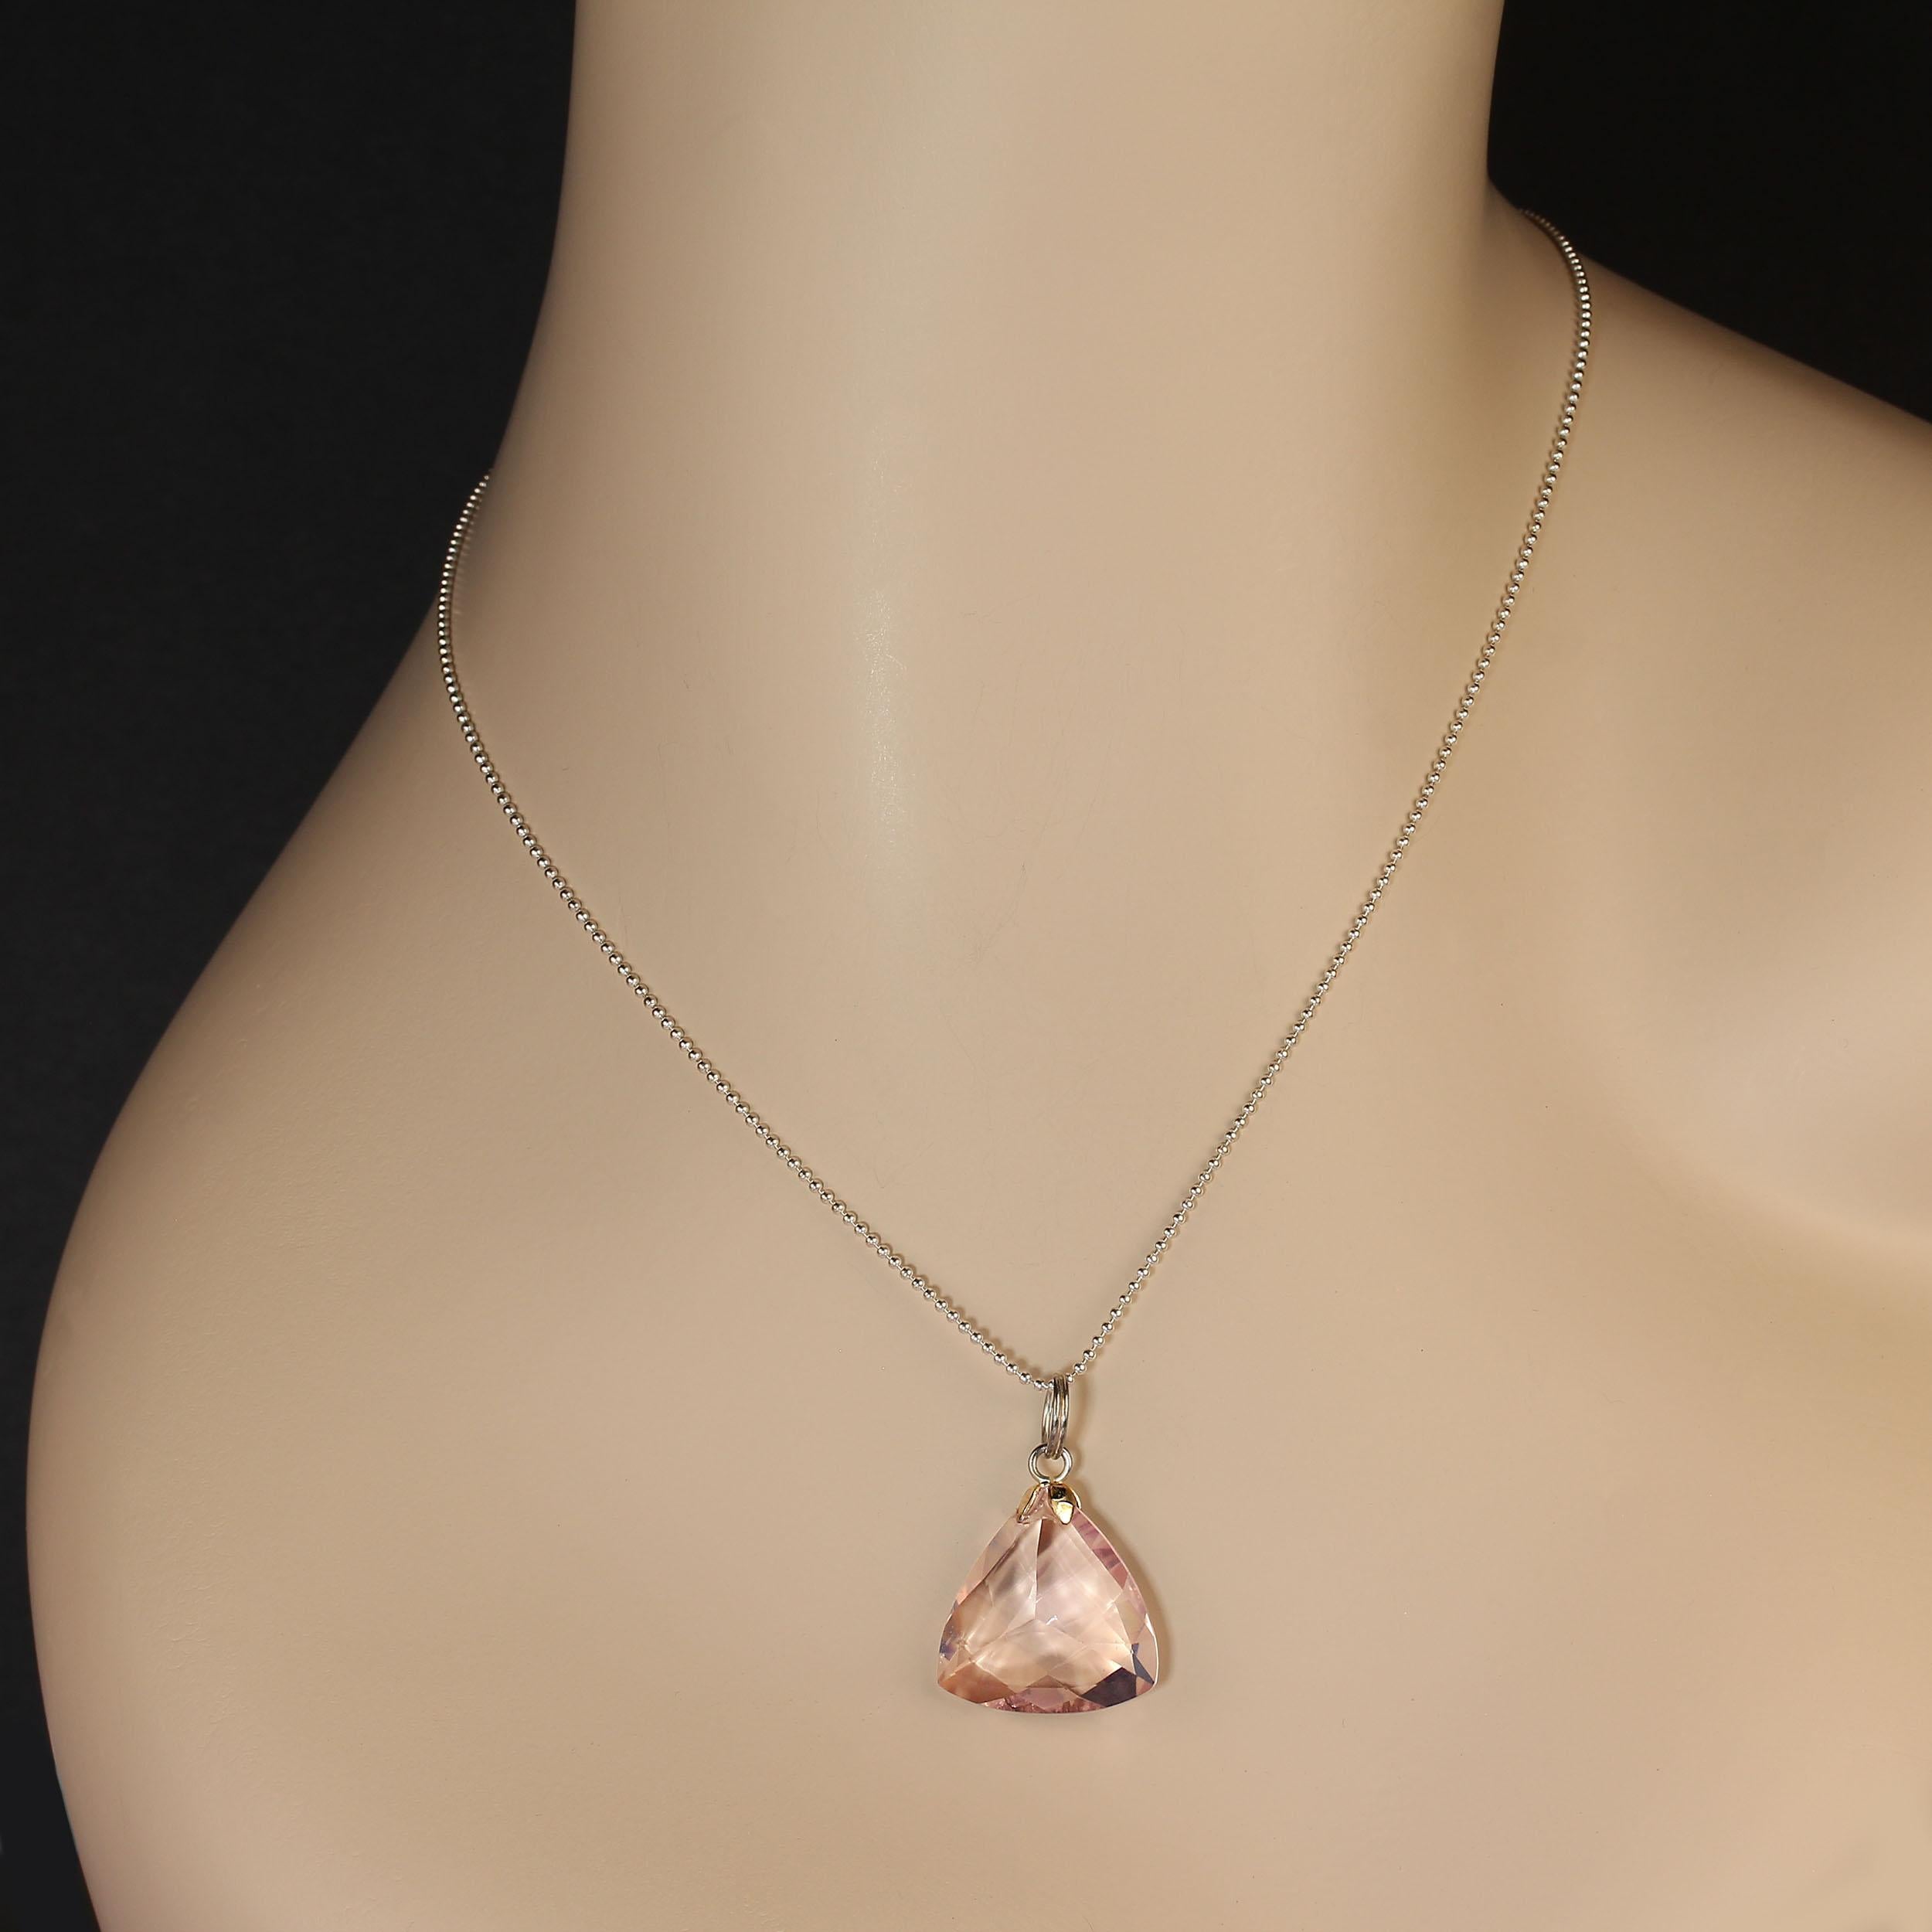 Finish your look with this triangle of soft pink Rose Quartz.  Loop in silver tone metal to hang this 30mm  trilliant pendant on your favorite chain or cord. 21mm x 20mm.  This is such a lovely pendant, beautifully faceted, it has just a touch a